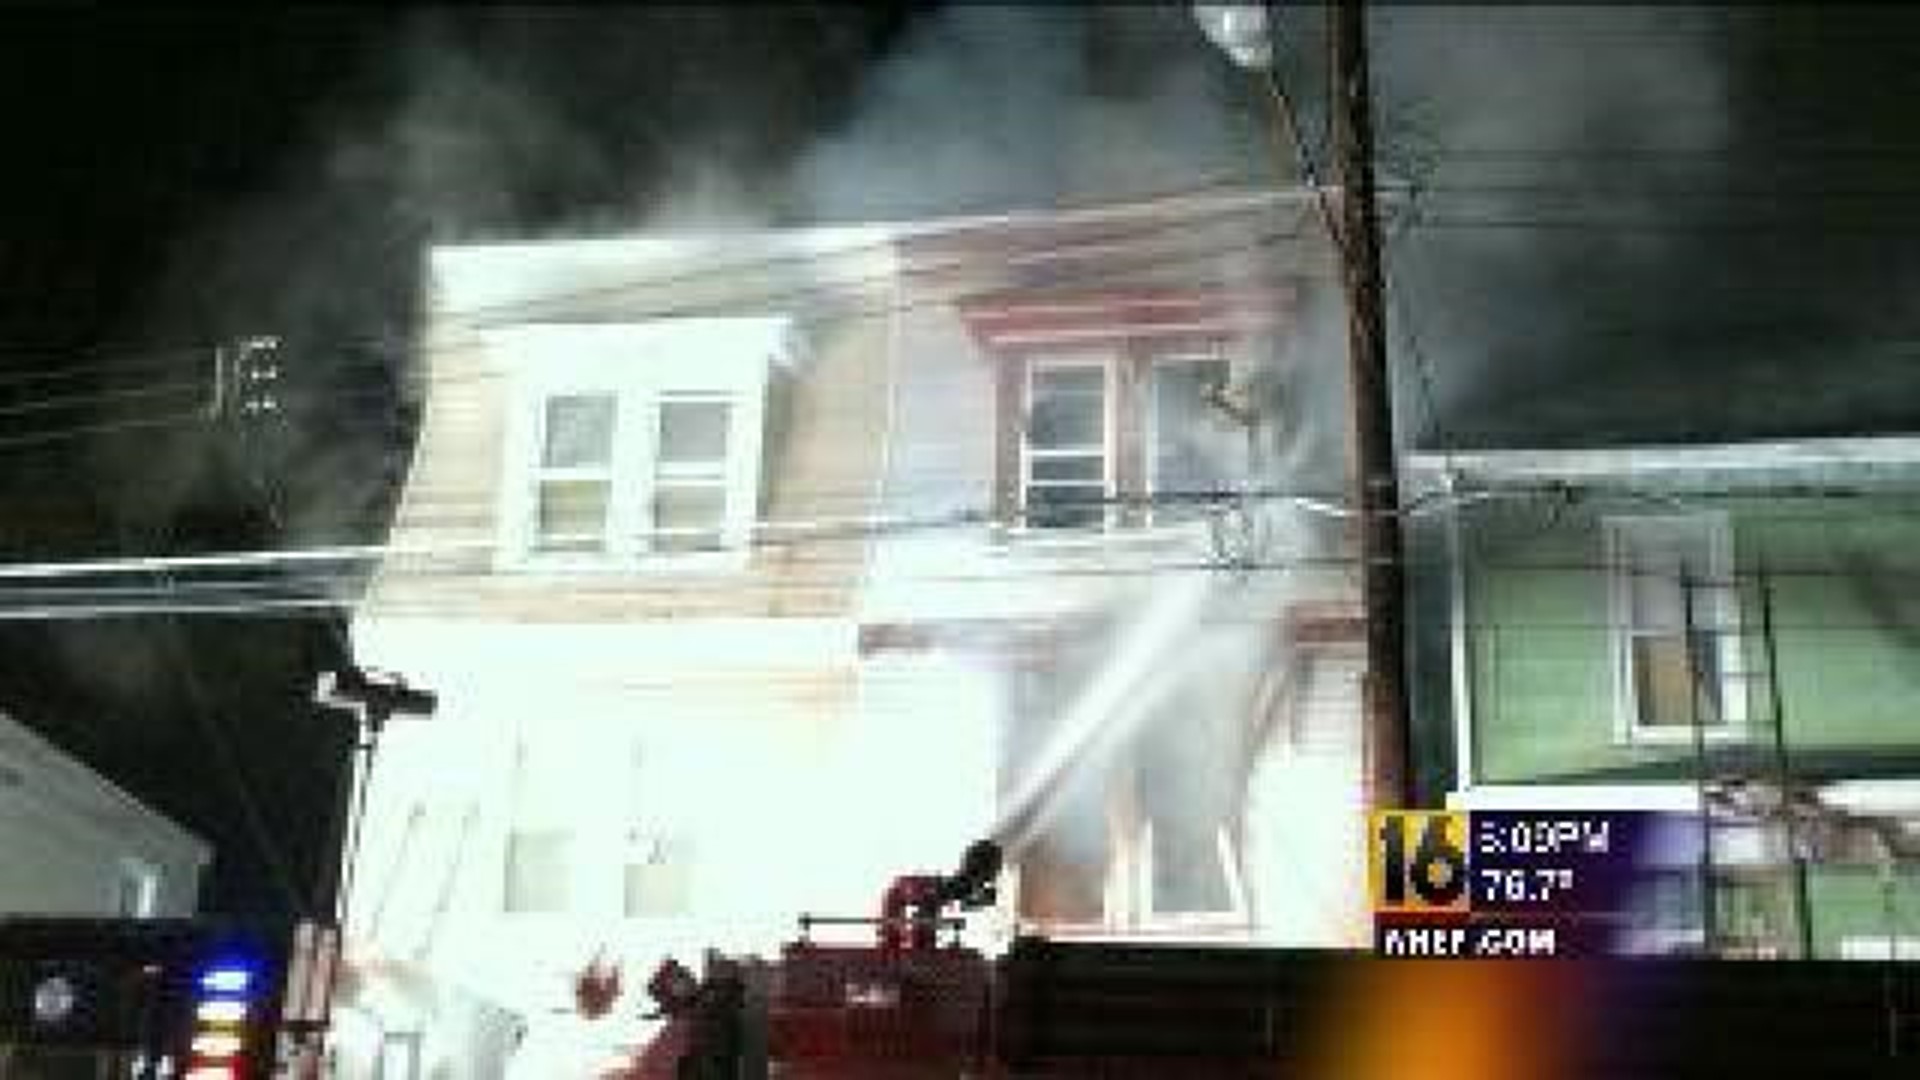 Two Houses Gutted, Neighbors Concerned